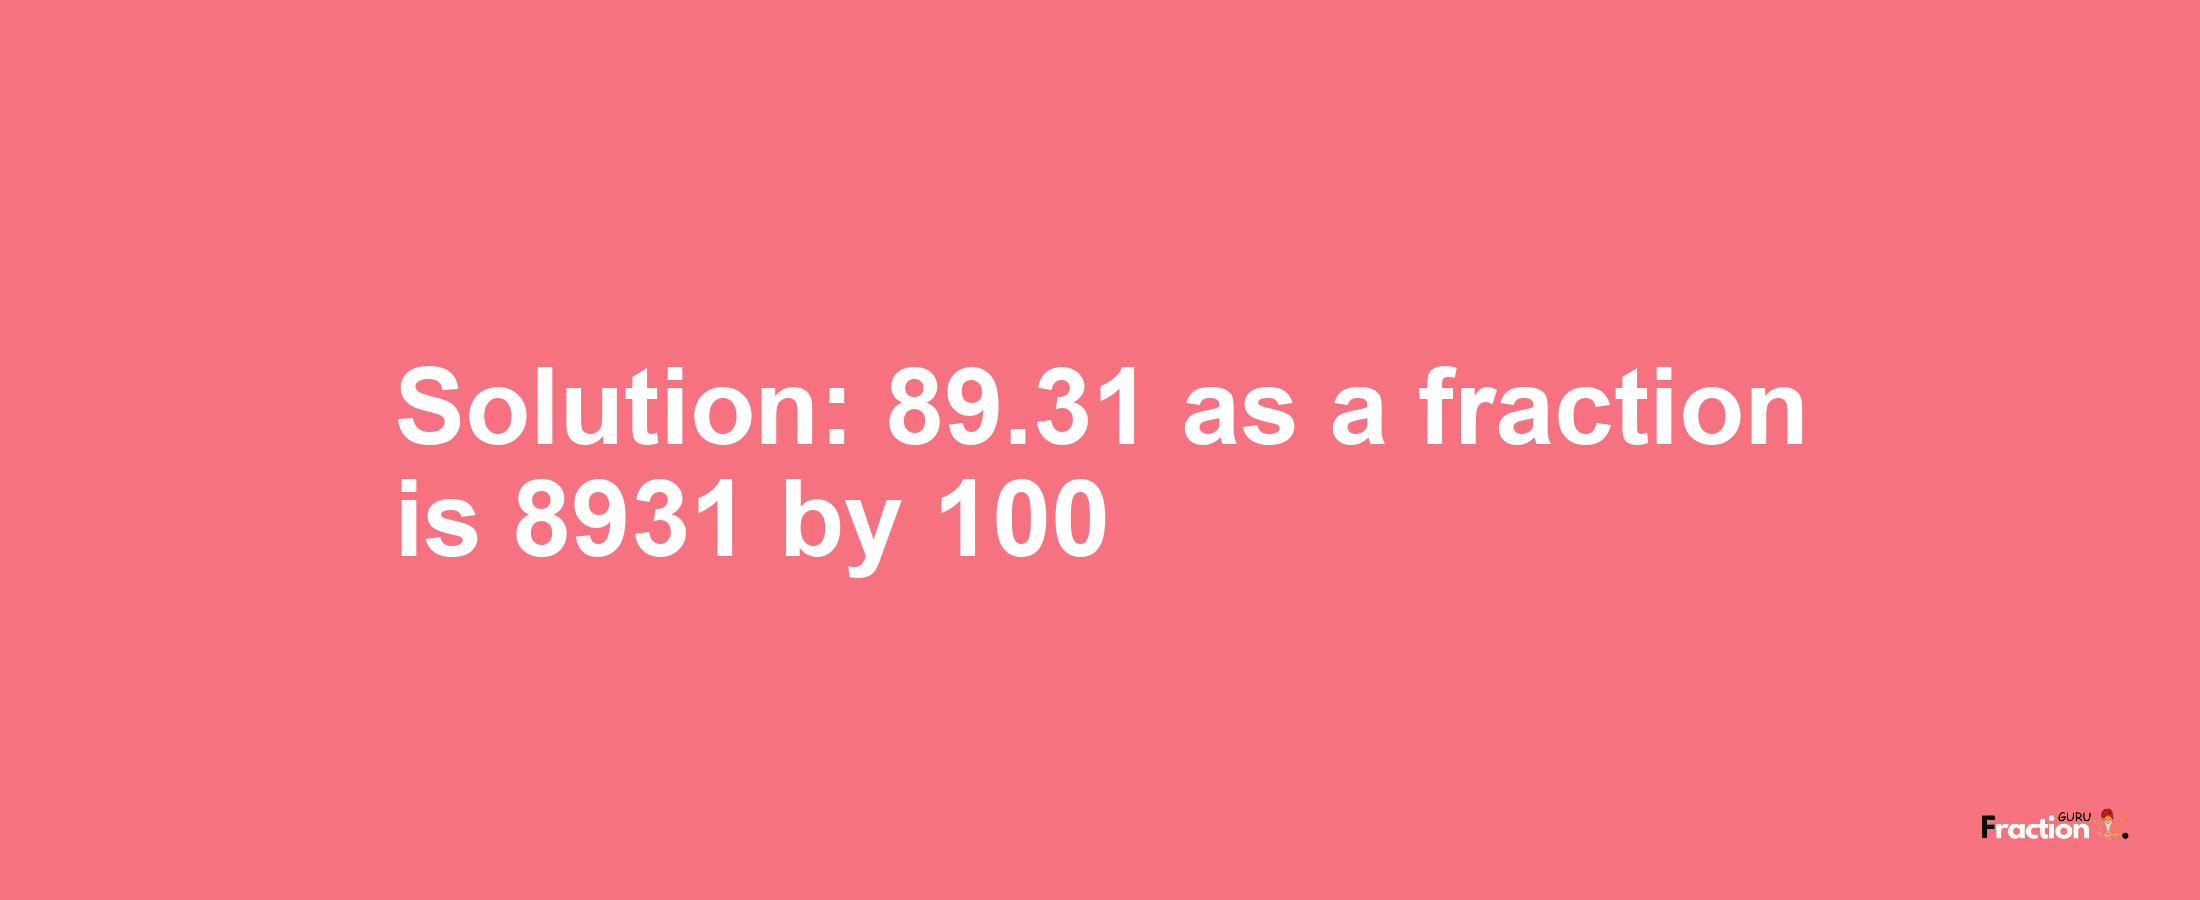 Solution:89.31 as a fraction is 8931/100